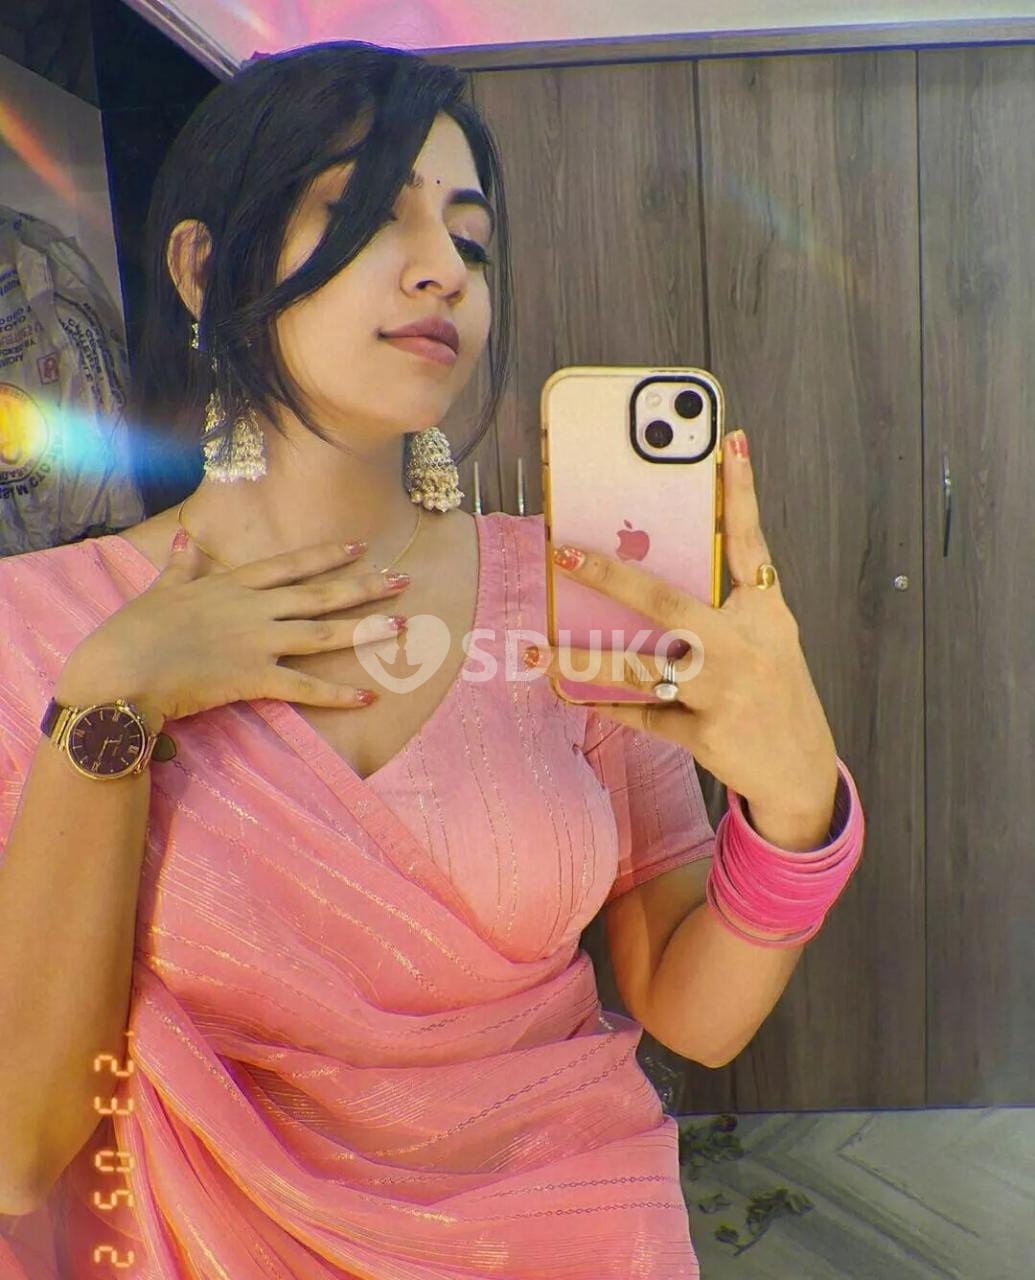 💐✅ONLY CASH PAYMENT VIP 💯💐TOP MODEL CHIEF AND BEST HAND 🛑CASH PAYMENT ONLY GENUINE PERSON INVITE